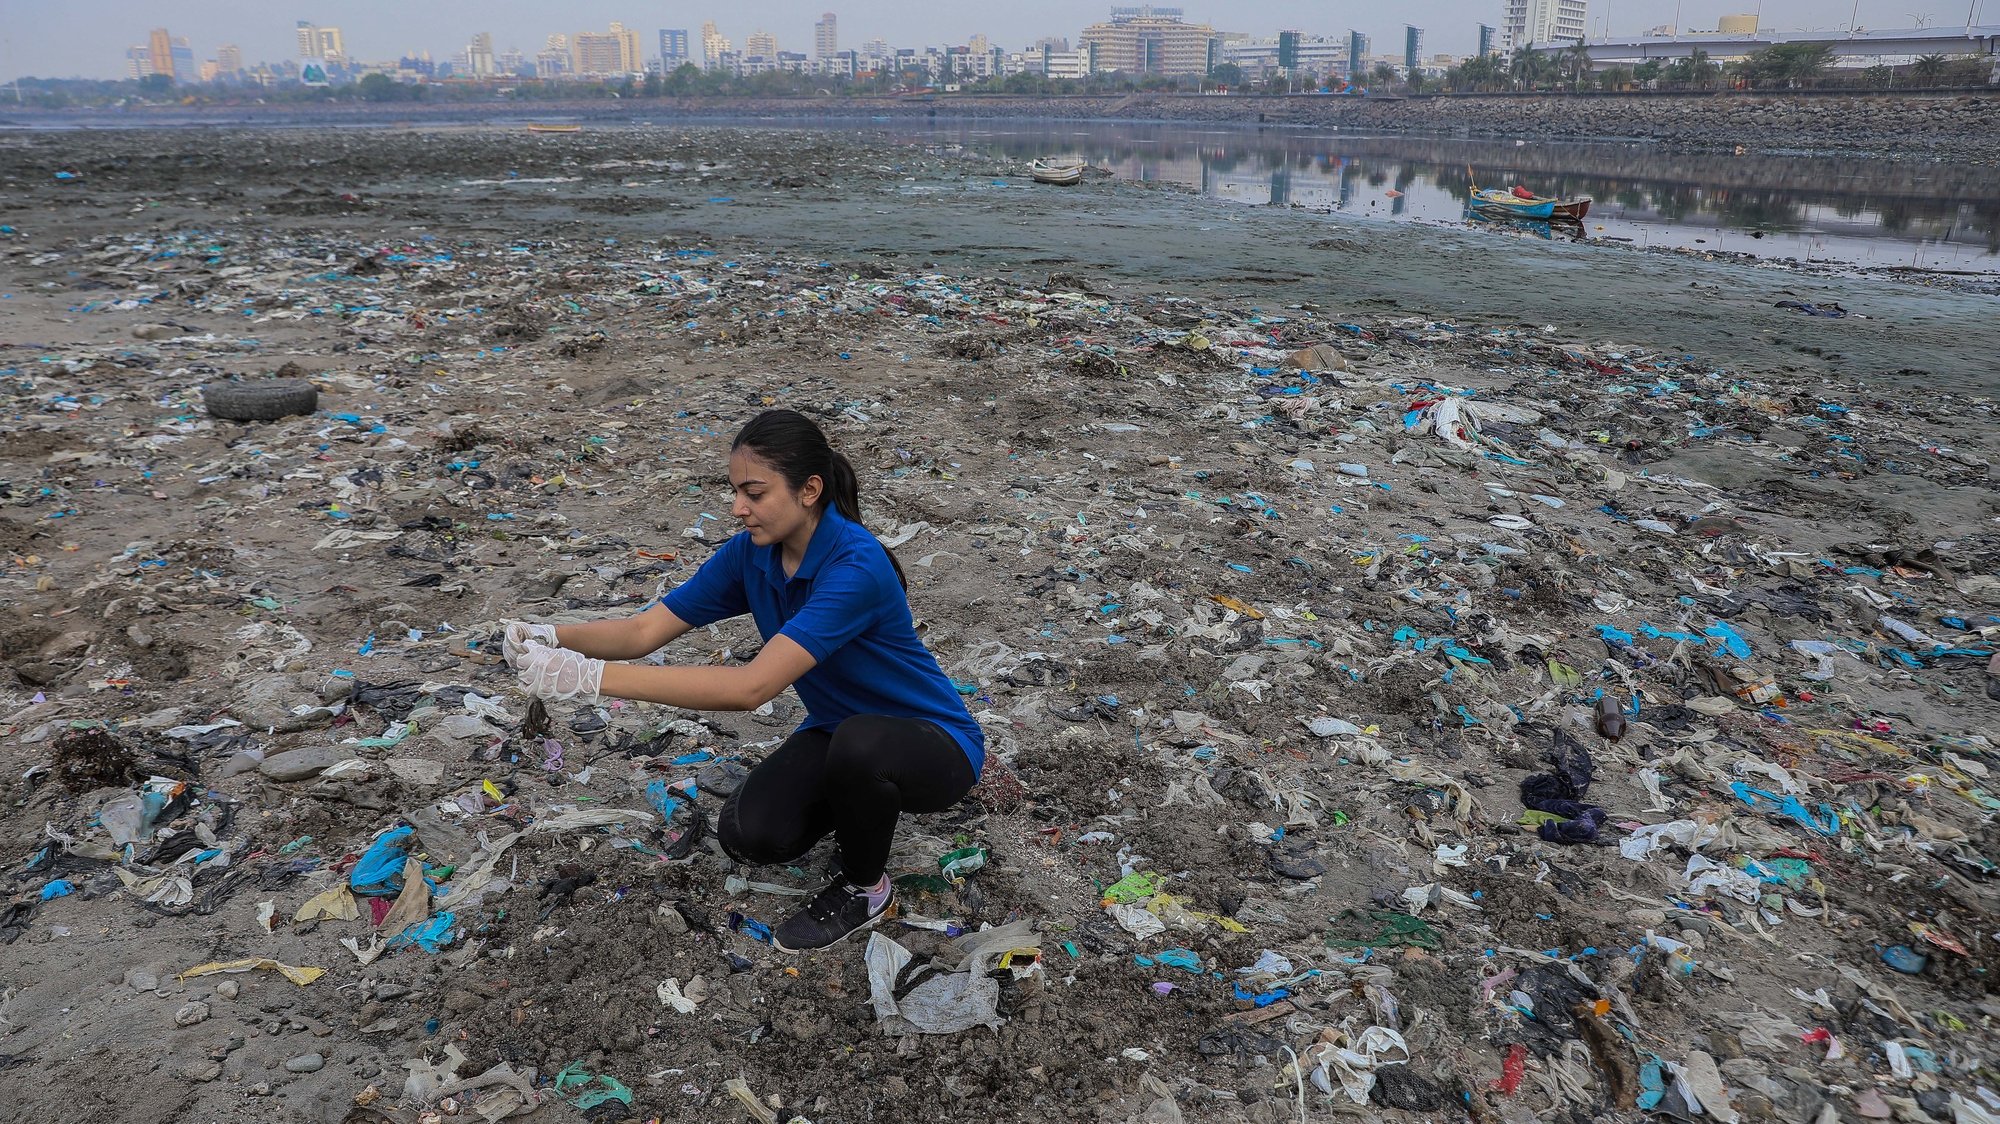 epa09901966 A volunteer picks up plastic waste and other forms of litter during a beach clean-up drive on the occasion of Earth Day 2022, at the seashore of Mahim beach, in Mumbai, India, 22 April 2022. Earth Day is celebrated every year on 22 April to raise awareness on environmental protection.  EPA/DIVYAKANT SOLANKI